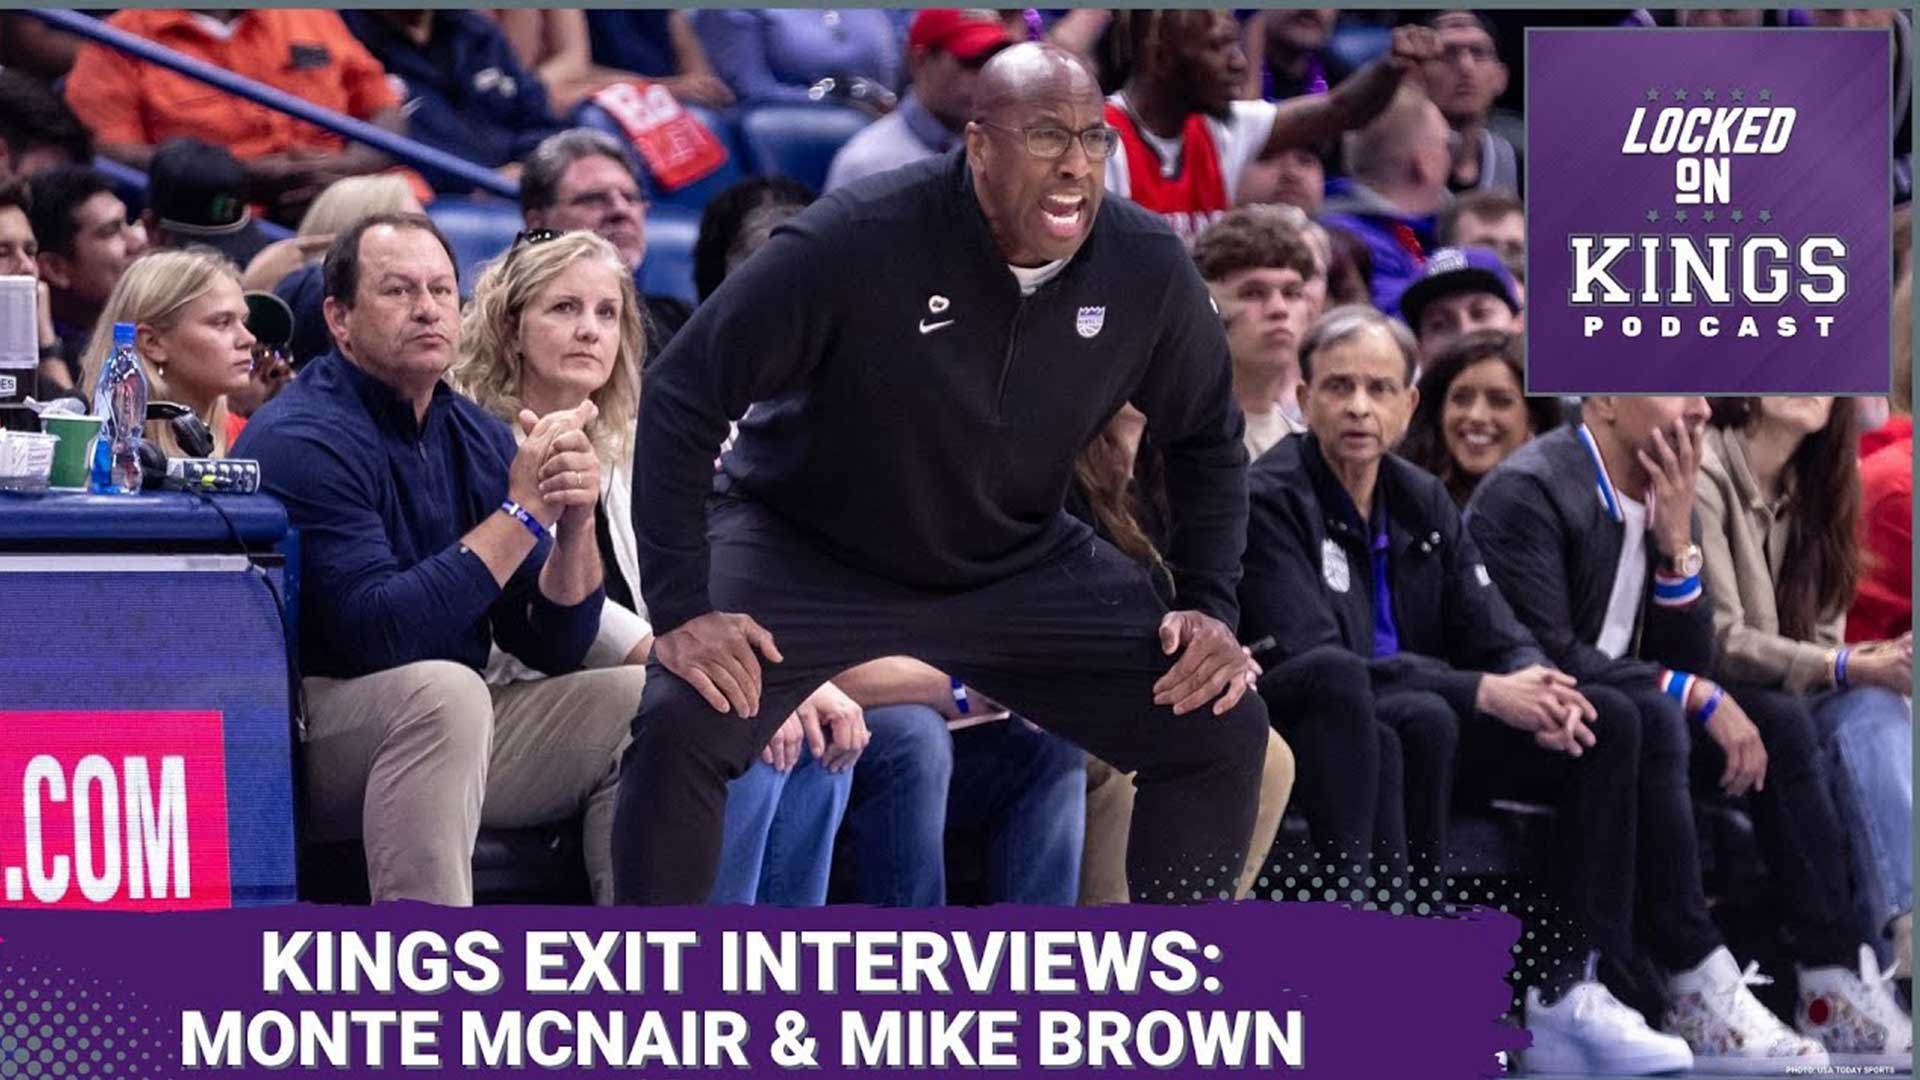 Matt George shares comments from Sacramento Kings general manager Monte McNair & head coach Mike Brown in their end-of-season press conferences.